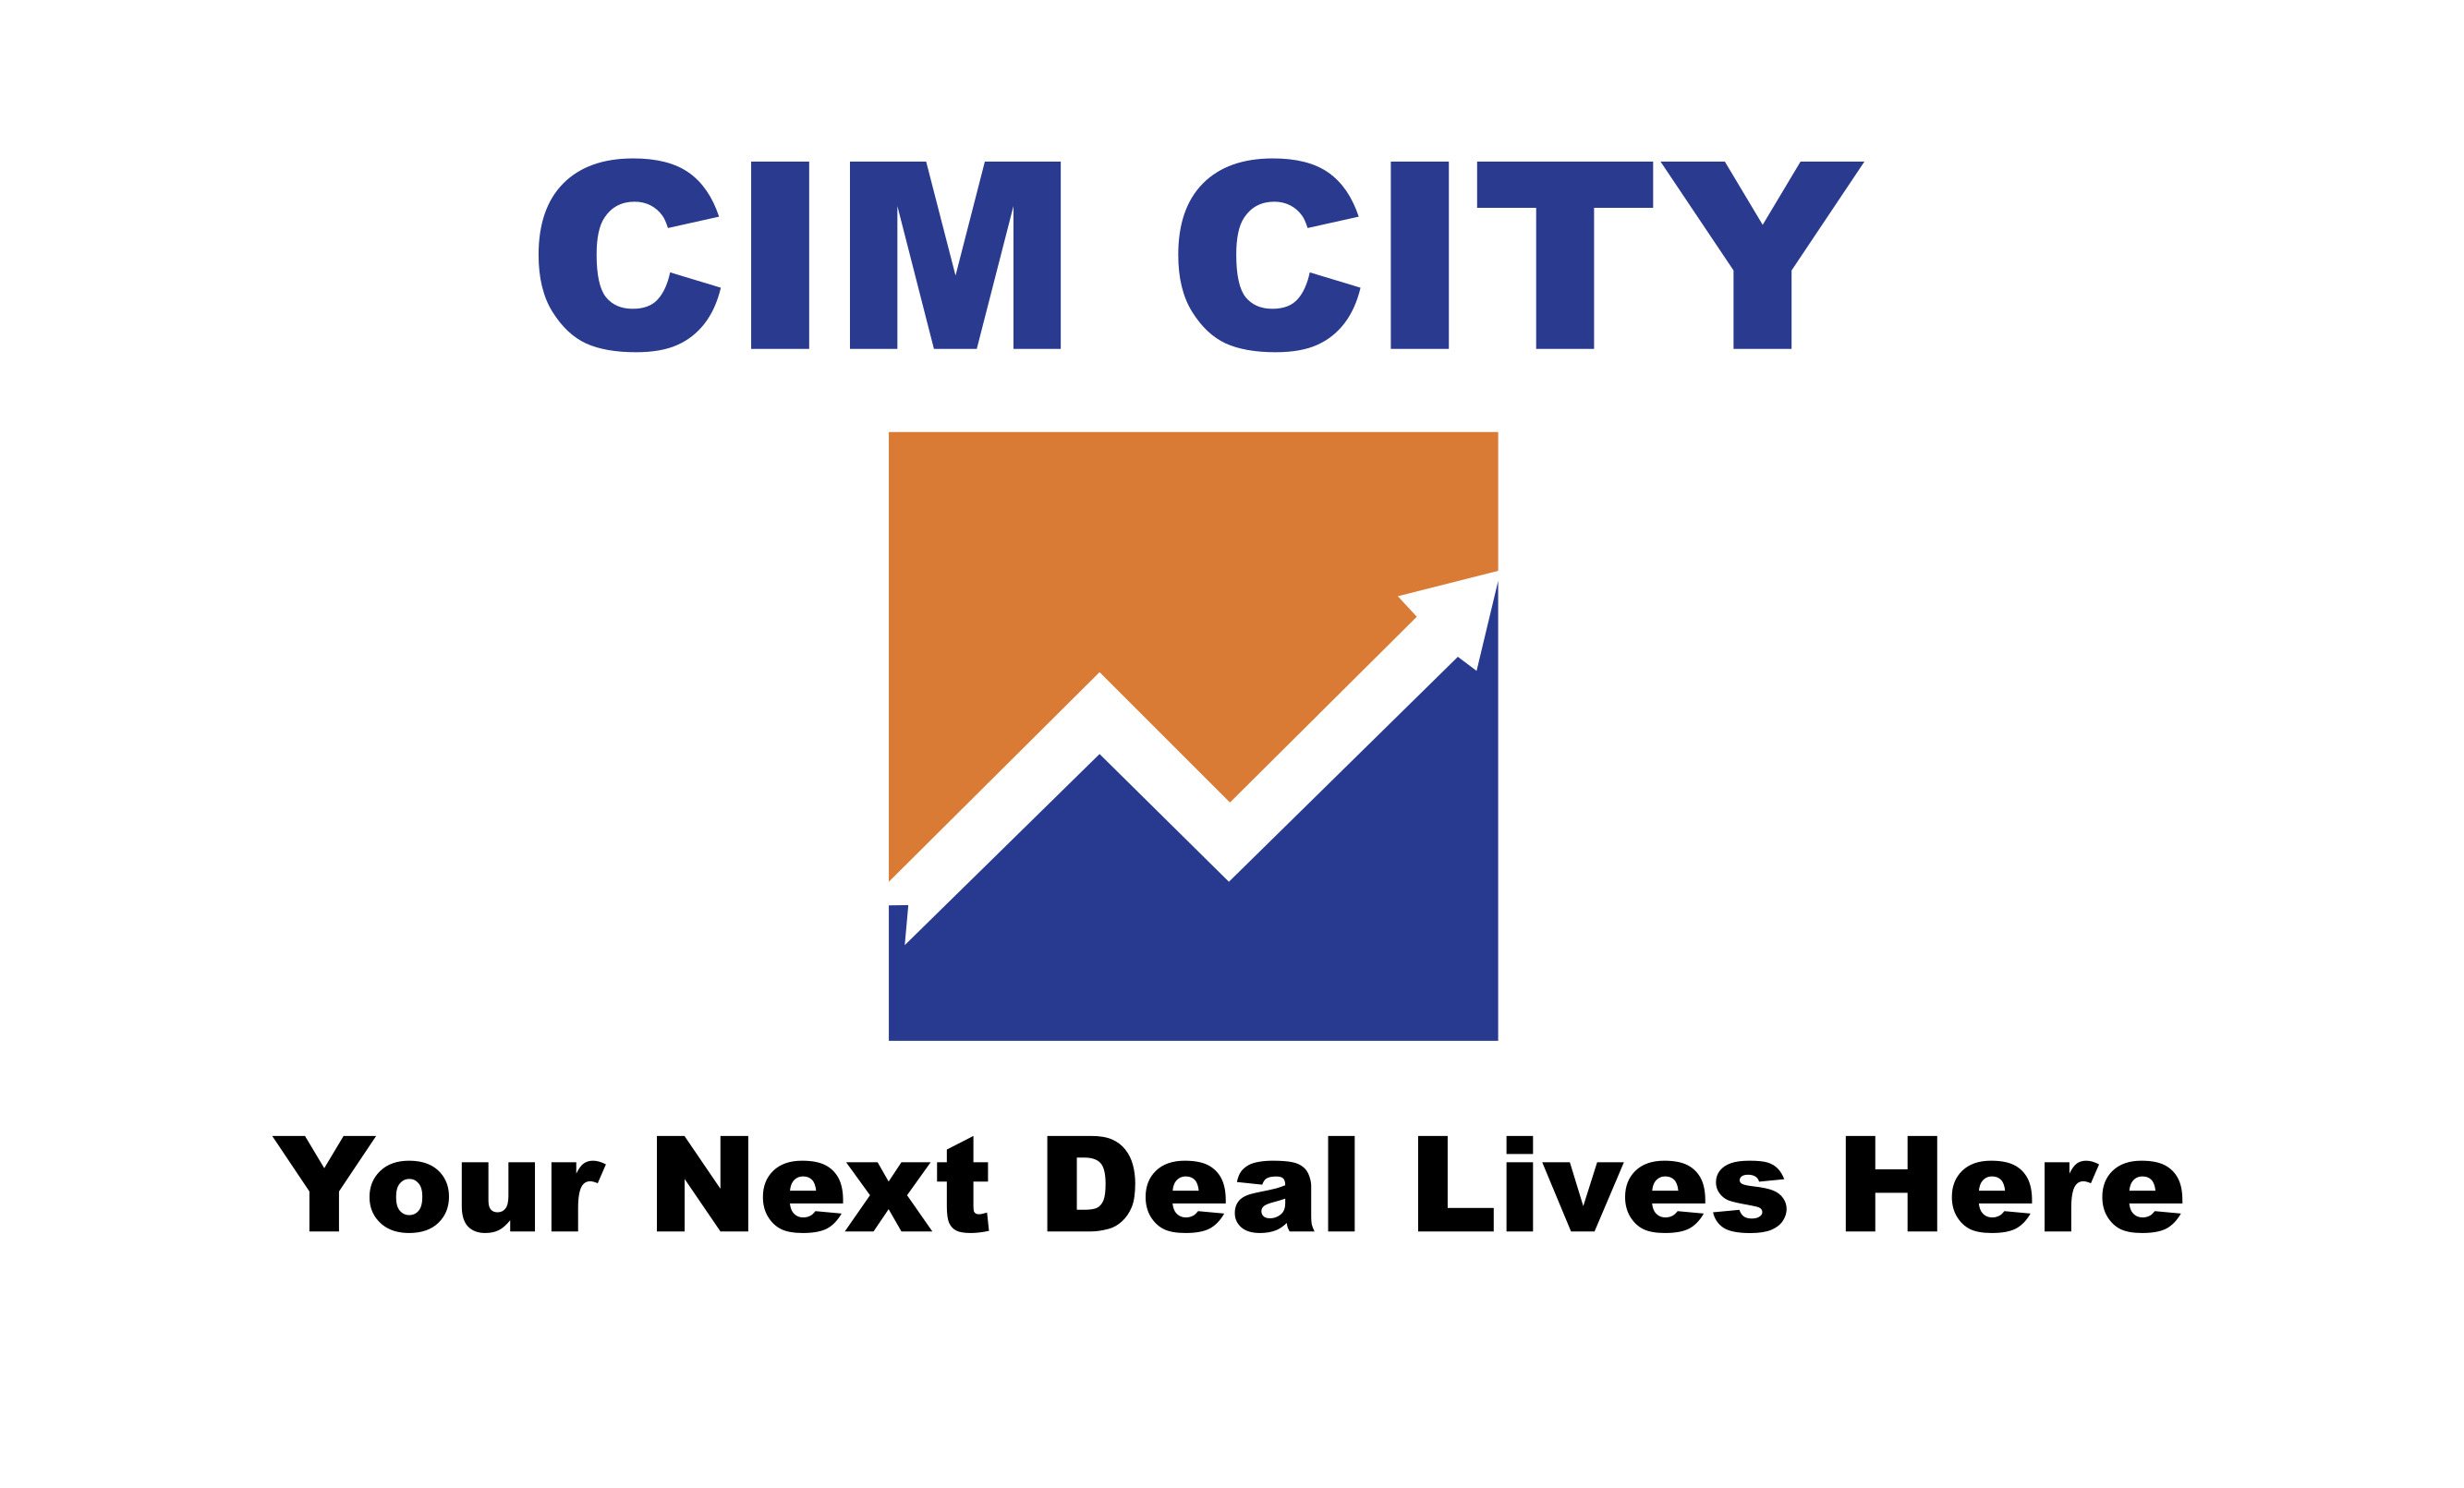 Invest in M&A in the U.S. organized by CIM City